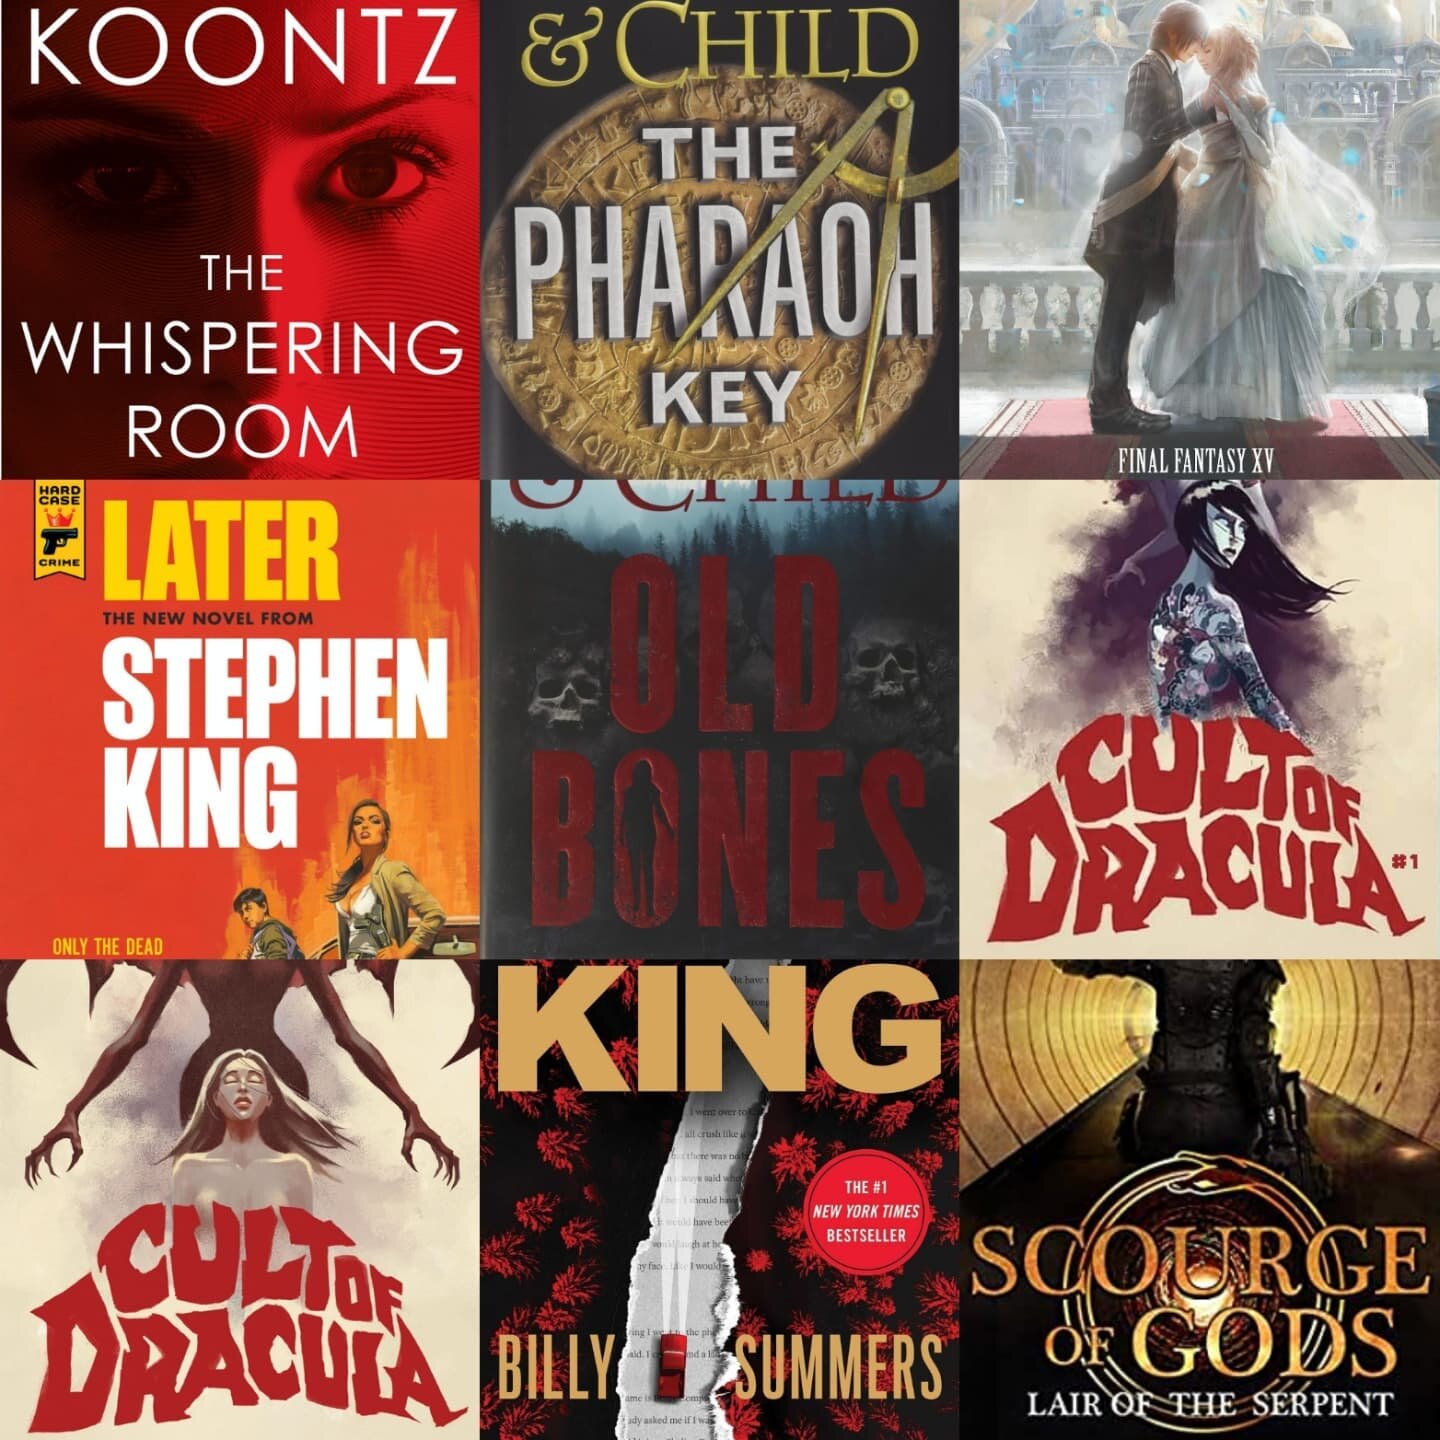 I was a little light on reading in 2021, although not quite like the year before.

Dean Koontz - The Whispering Room
Douglas Preston &amp; Lincoln Child - The Pharaoh Key
Jun Eishima - Final Fantasy XV: The Dawn of the Future
Stephen King - Later
Dou